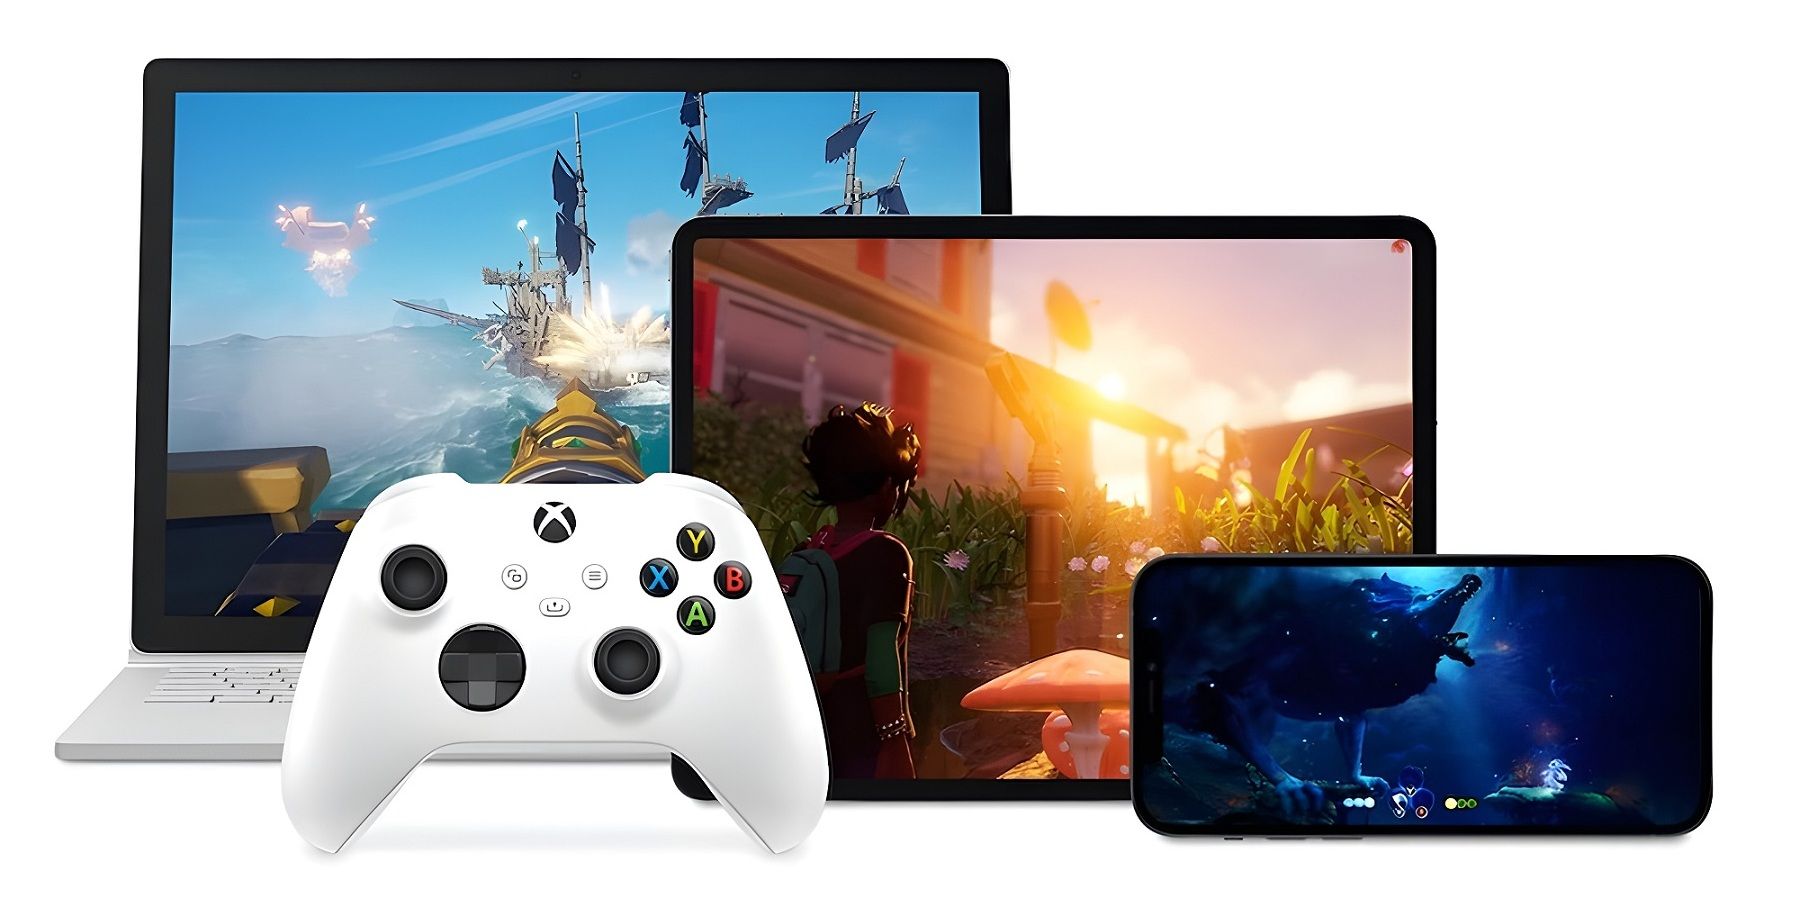 How to Use Cloud Gaming to Play Xbox Games on Your Android Phone